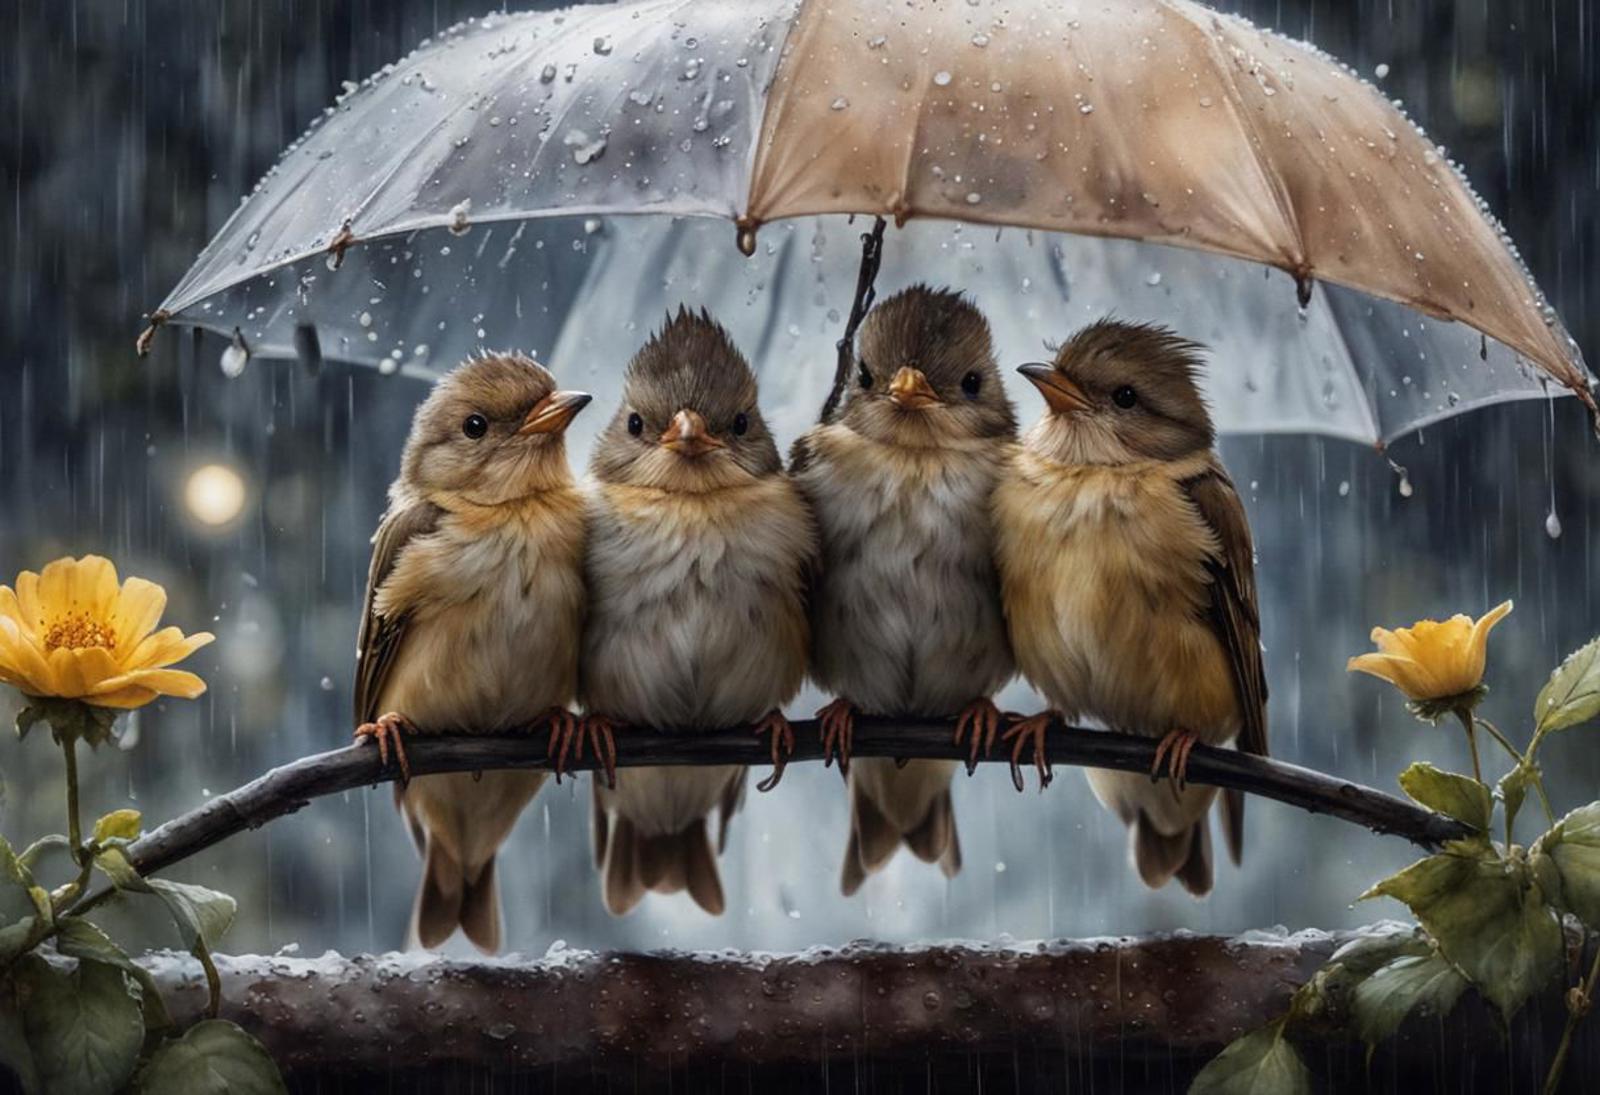 Three Baby Birds Perched Together Under an Umbrella in the Rain